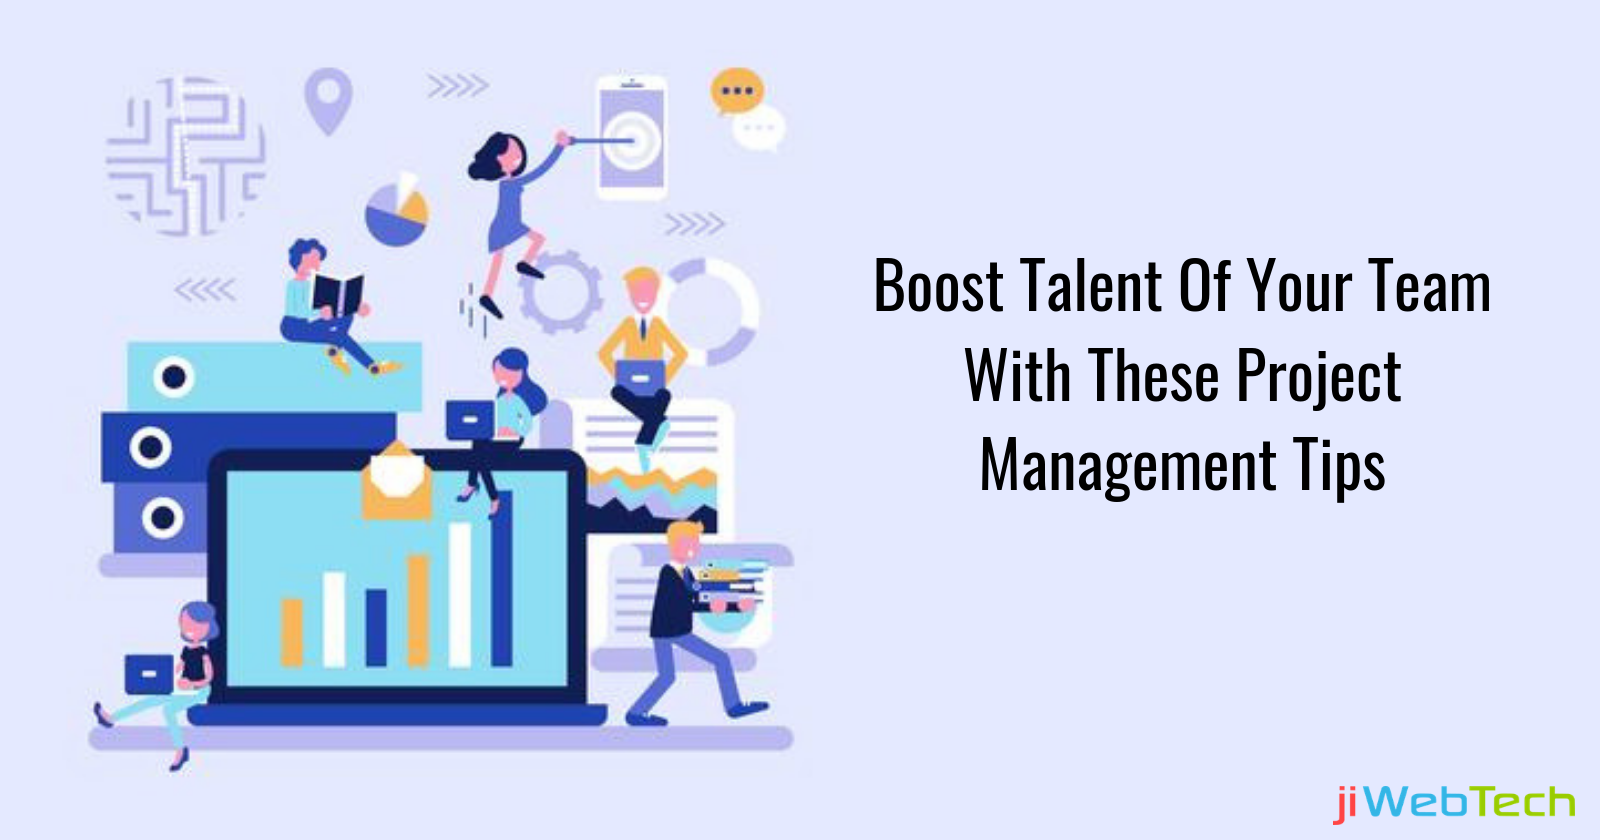 Boost Talent Of Your Team With These Project Management Tips